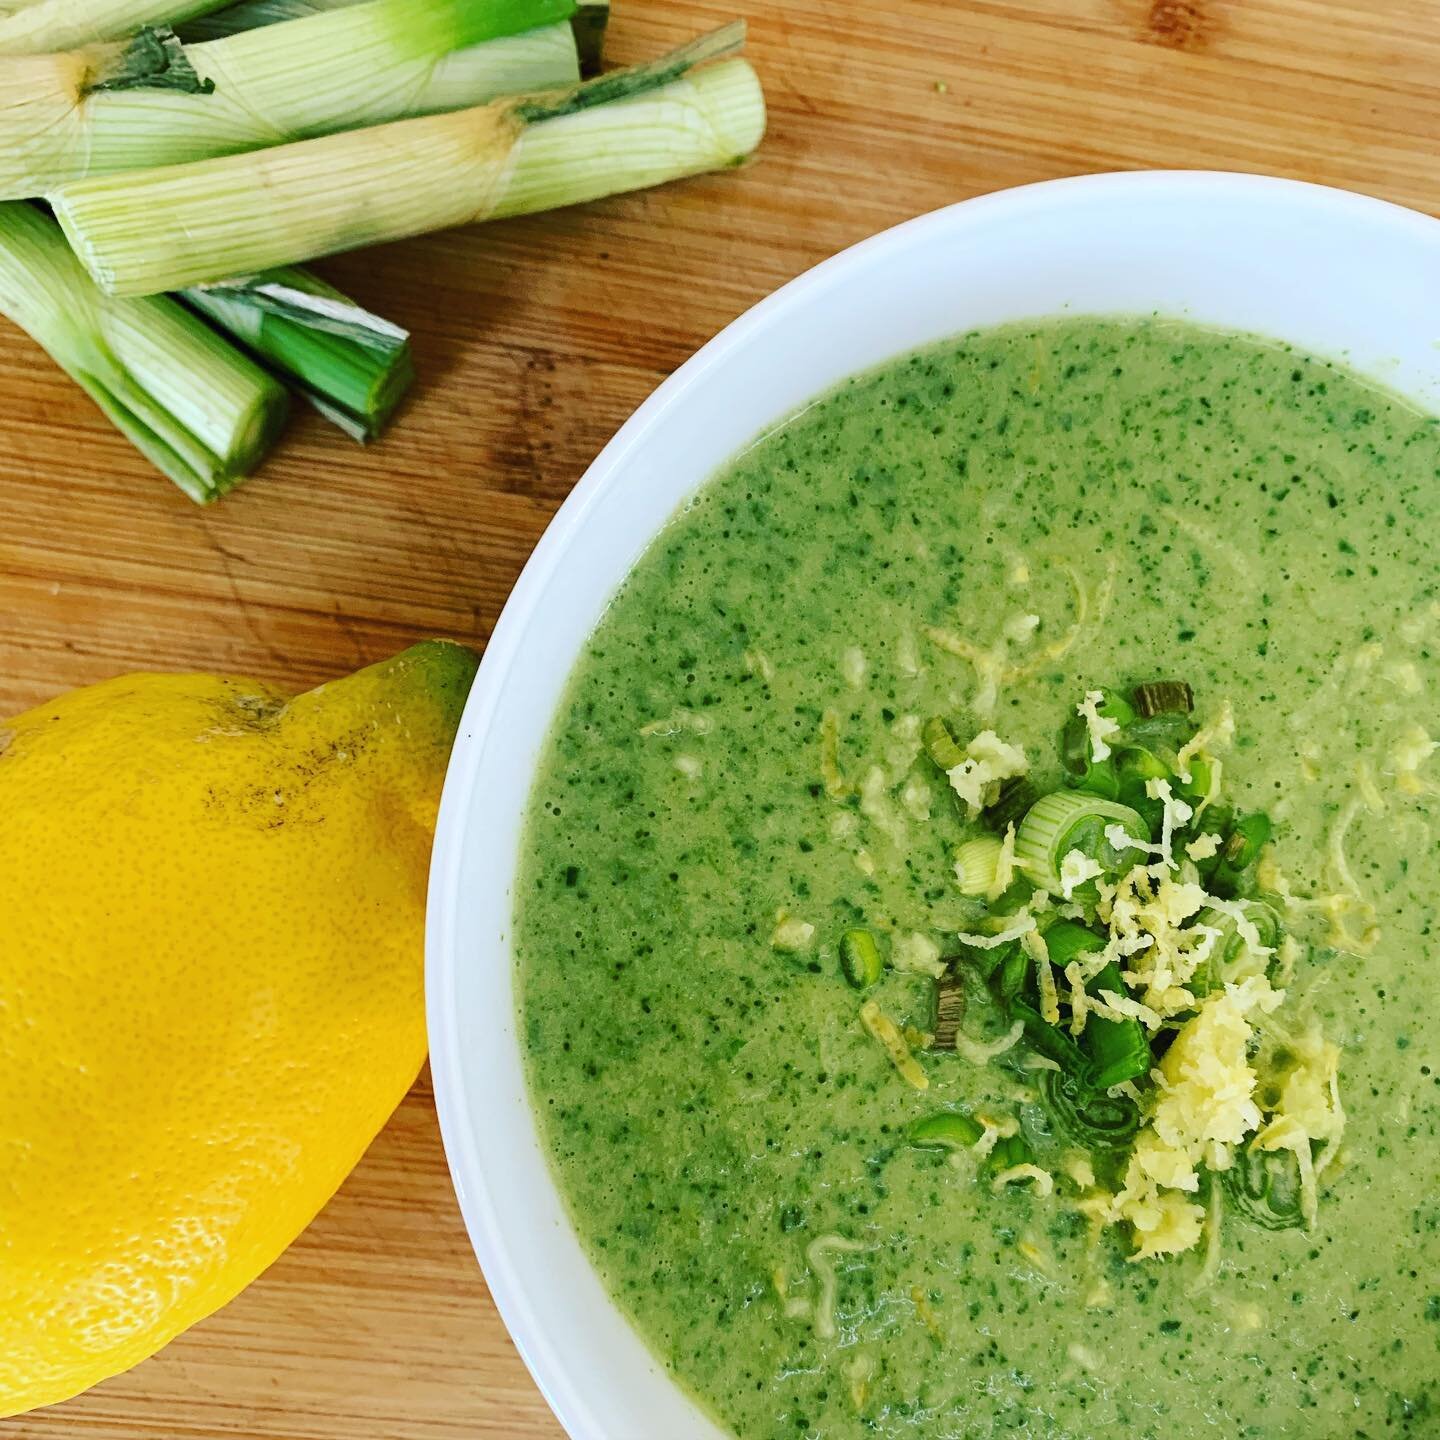 Soup for breakfast? 

Yep I just did that.

Amazing Thai broccoli and spinach soup, courtesy of the Clean Program.

Tastes like Thai green curry. 

Made with love in a temporary kitchen with a few simple ingredients.

Perfect for a light dinner, or b